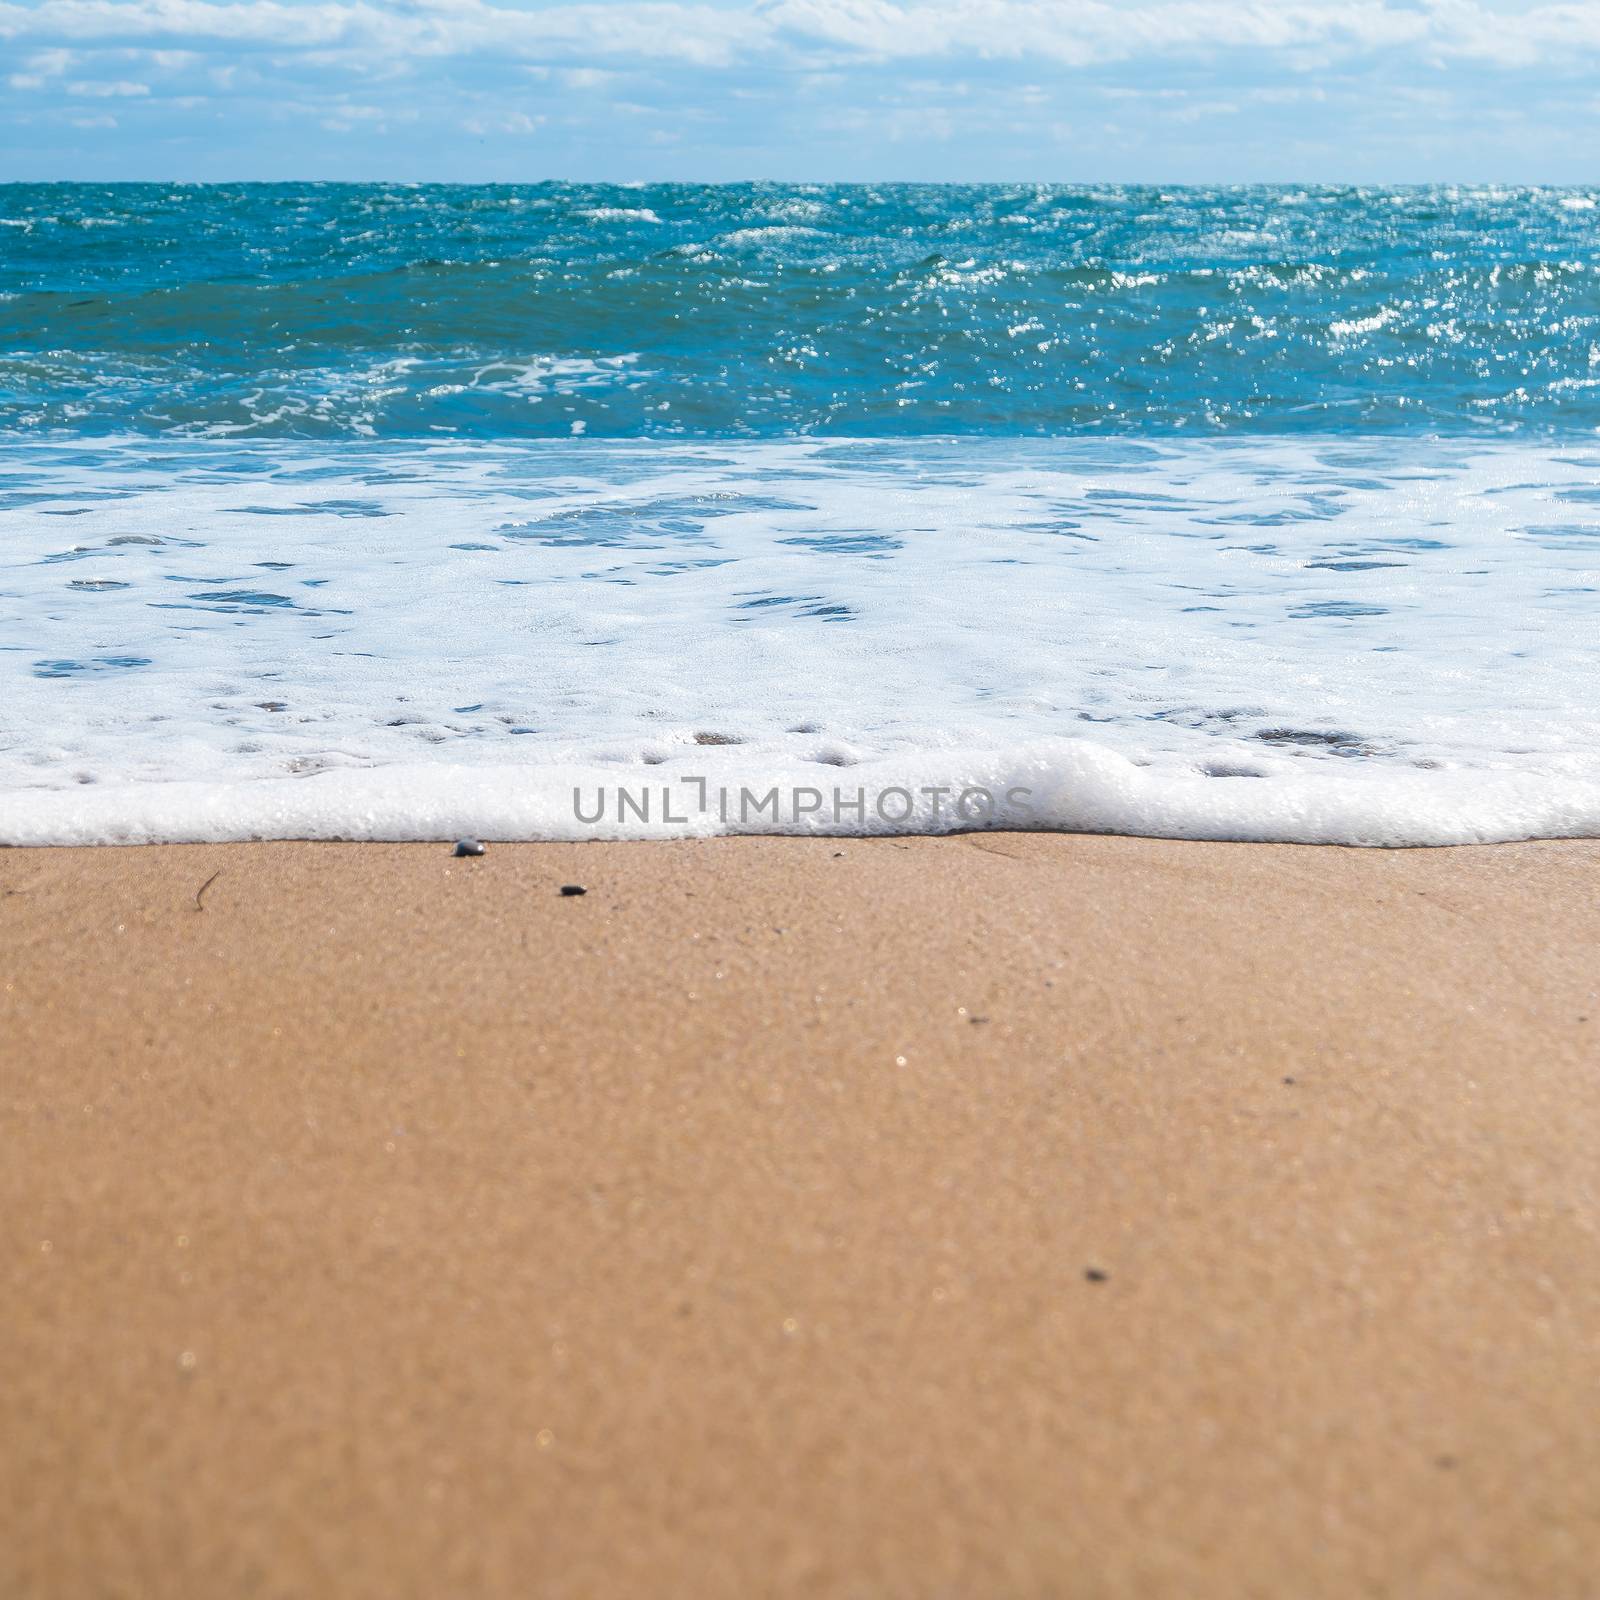 Blue sea and beach with golden sand. Summer vacation background